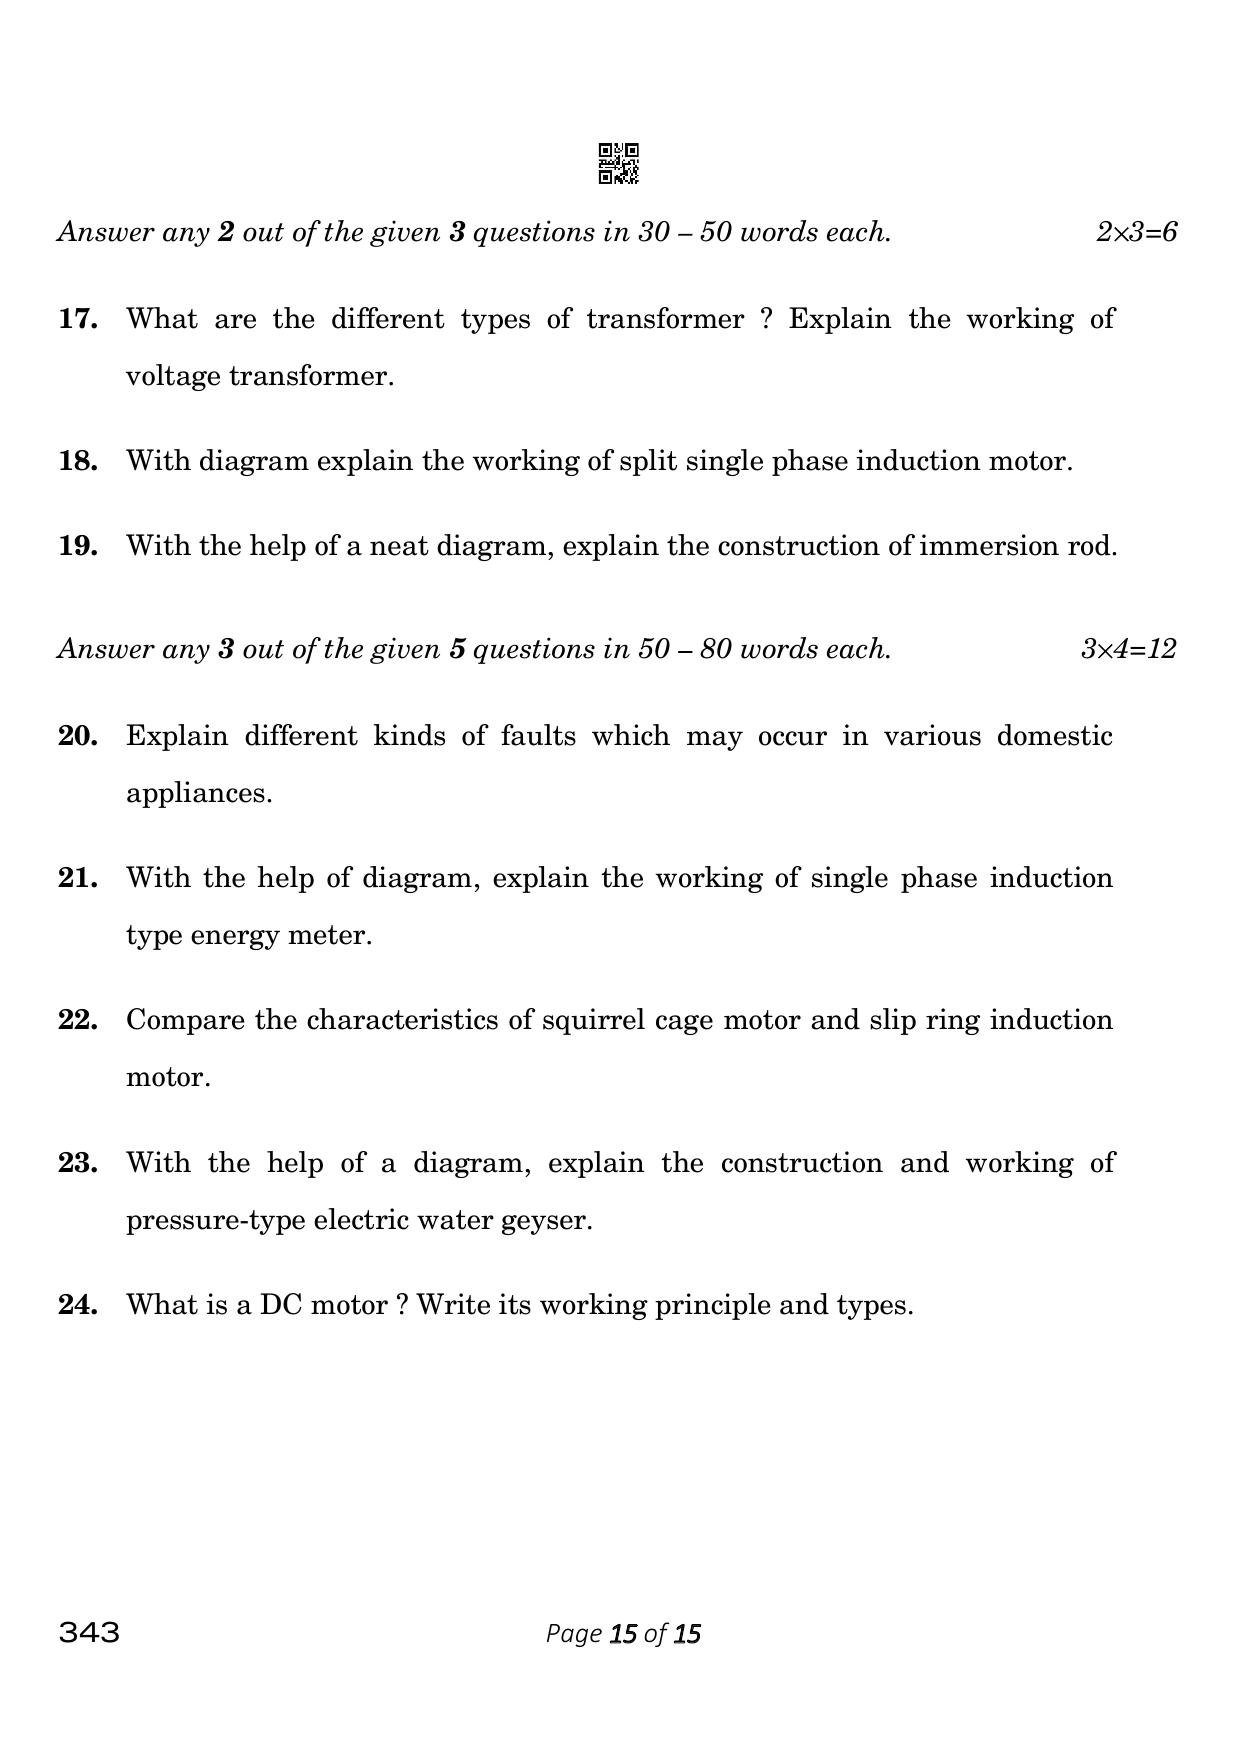 CBSE Class 12 343_Electrical Technology 2023 Question Paper - Page 15